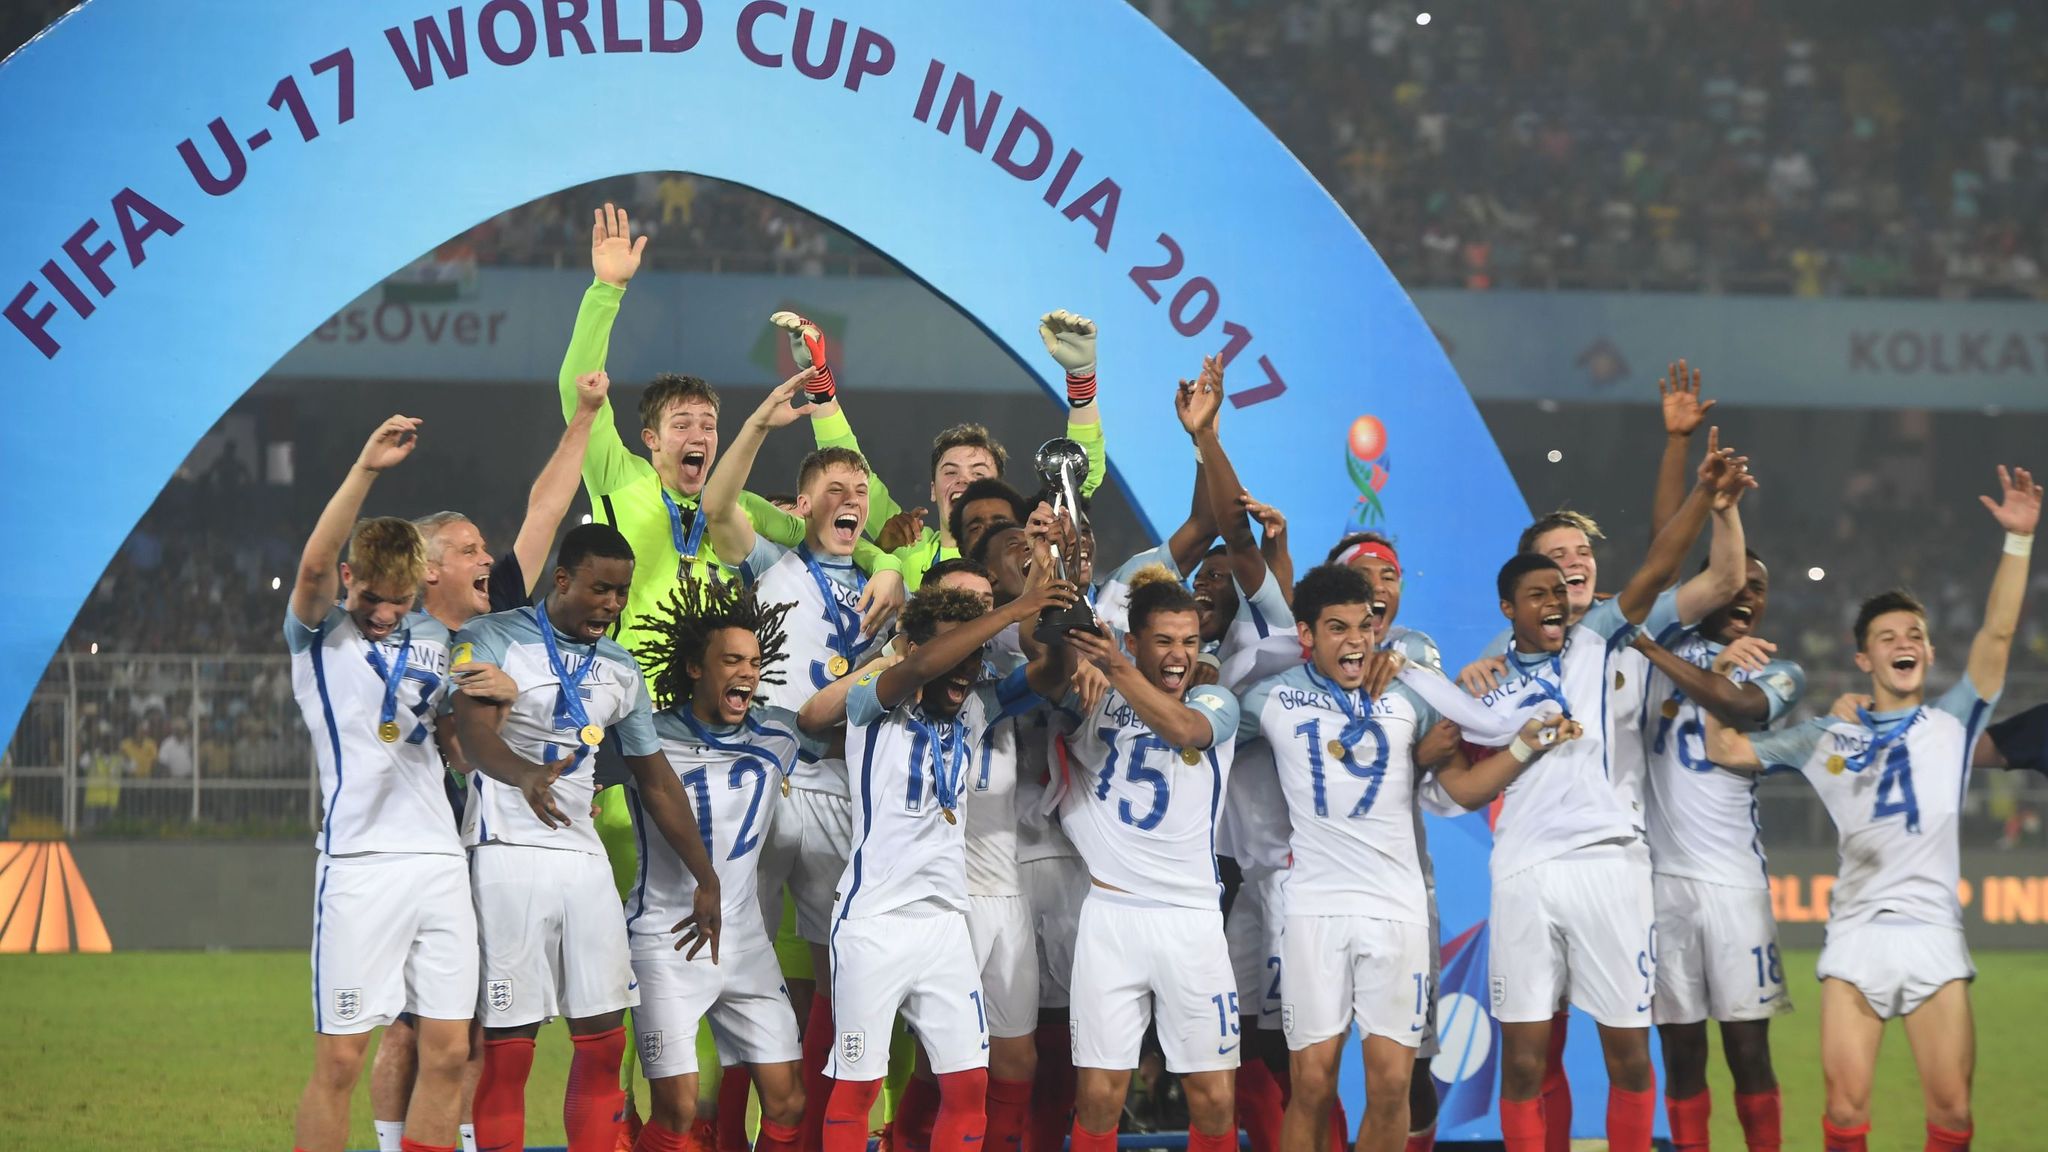 England S U17 World Cup Win The Latest Youth Triumph This Year Football News Sky Sports